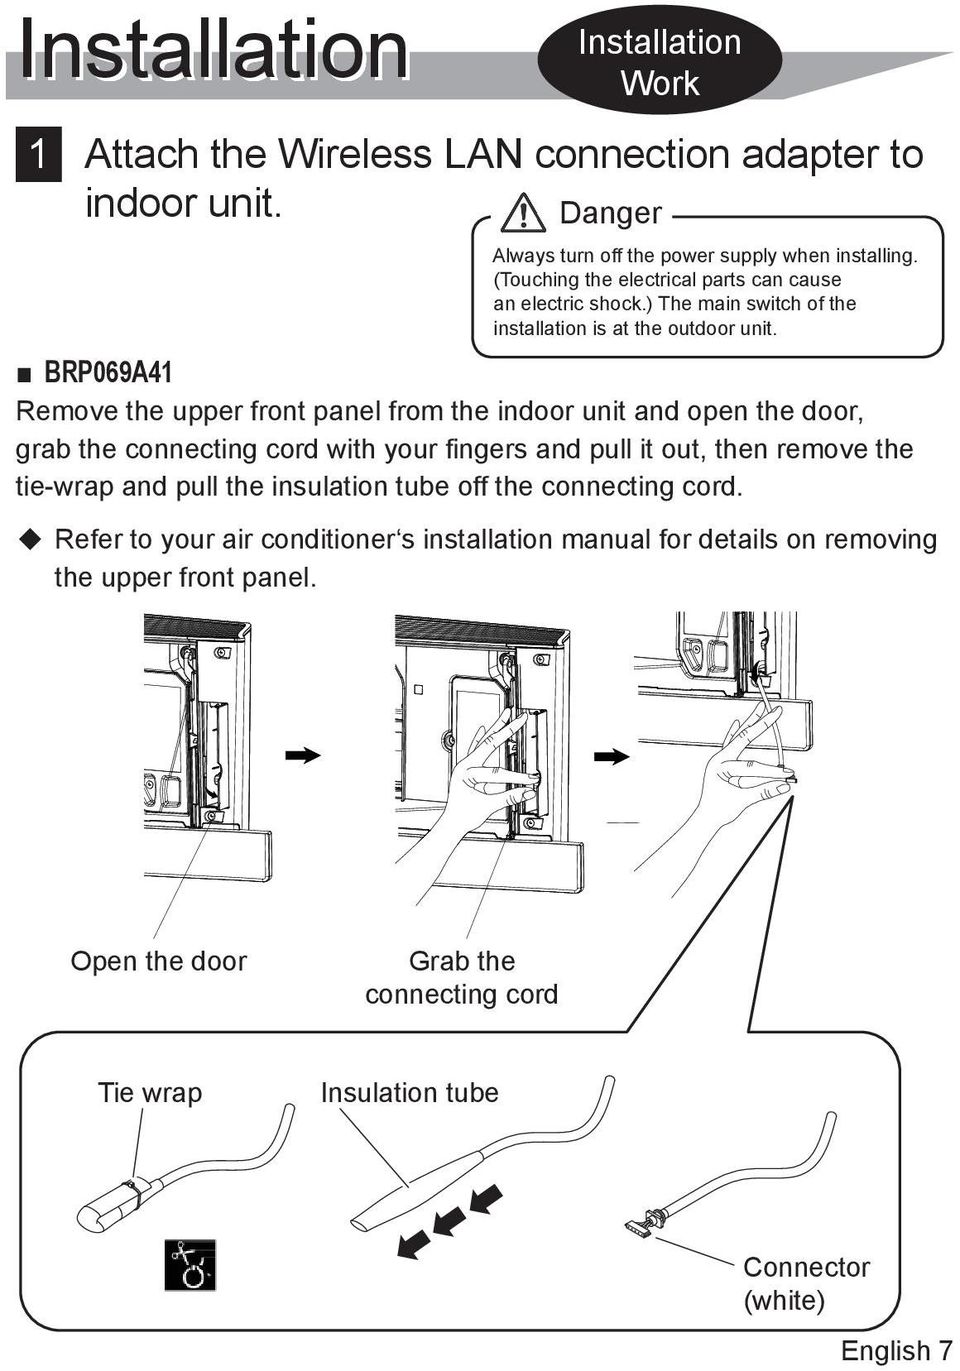 BRP069A41 Remove the upper front panel from the indoor unit and open the door, grab the connecting cord with your fingers and pull it out, then remove the tie wrap and